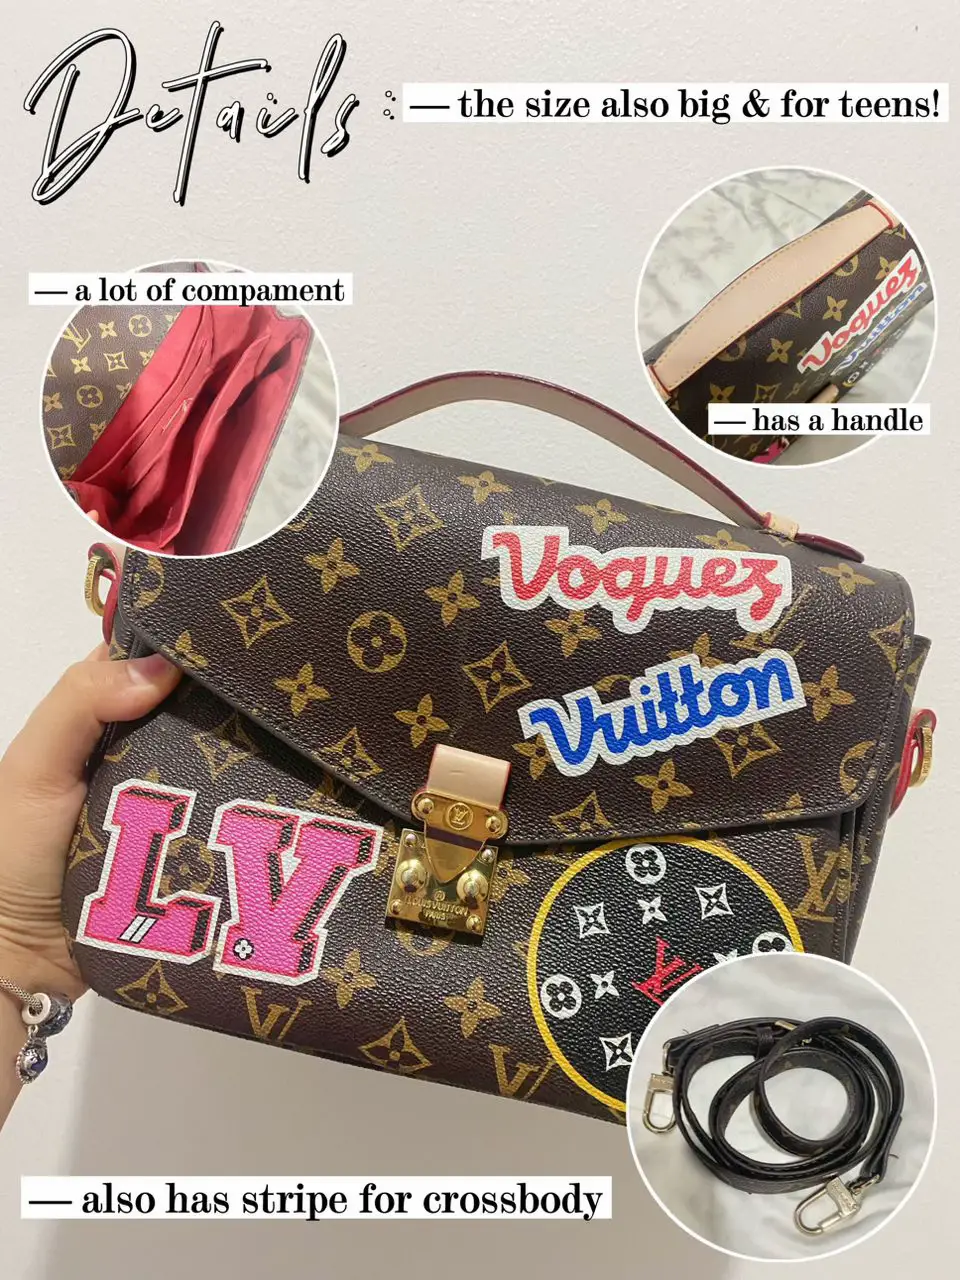 LV Neverfull MM Tote Bag (buy or bye?!), Gallery posted by mutiarahazle